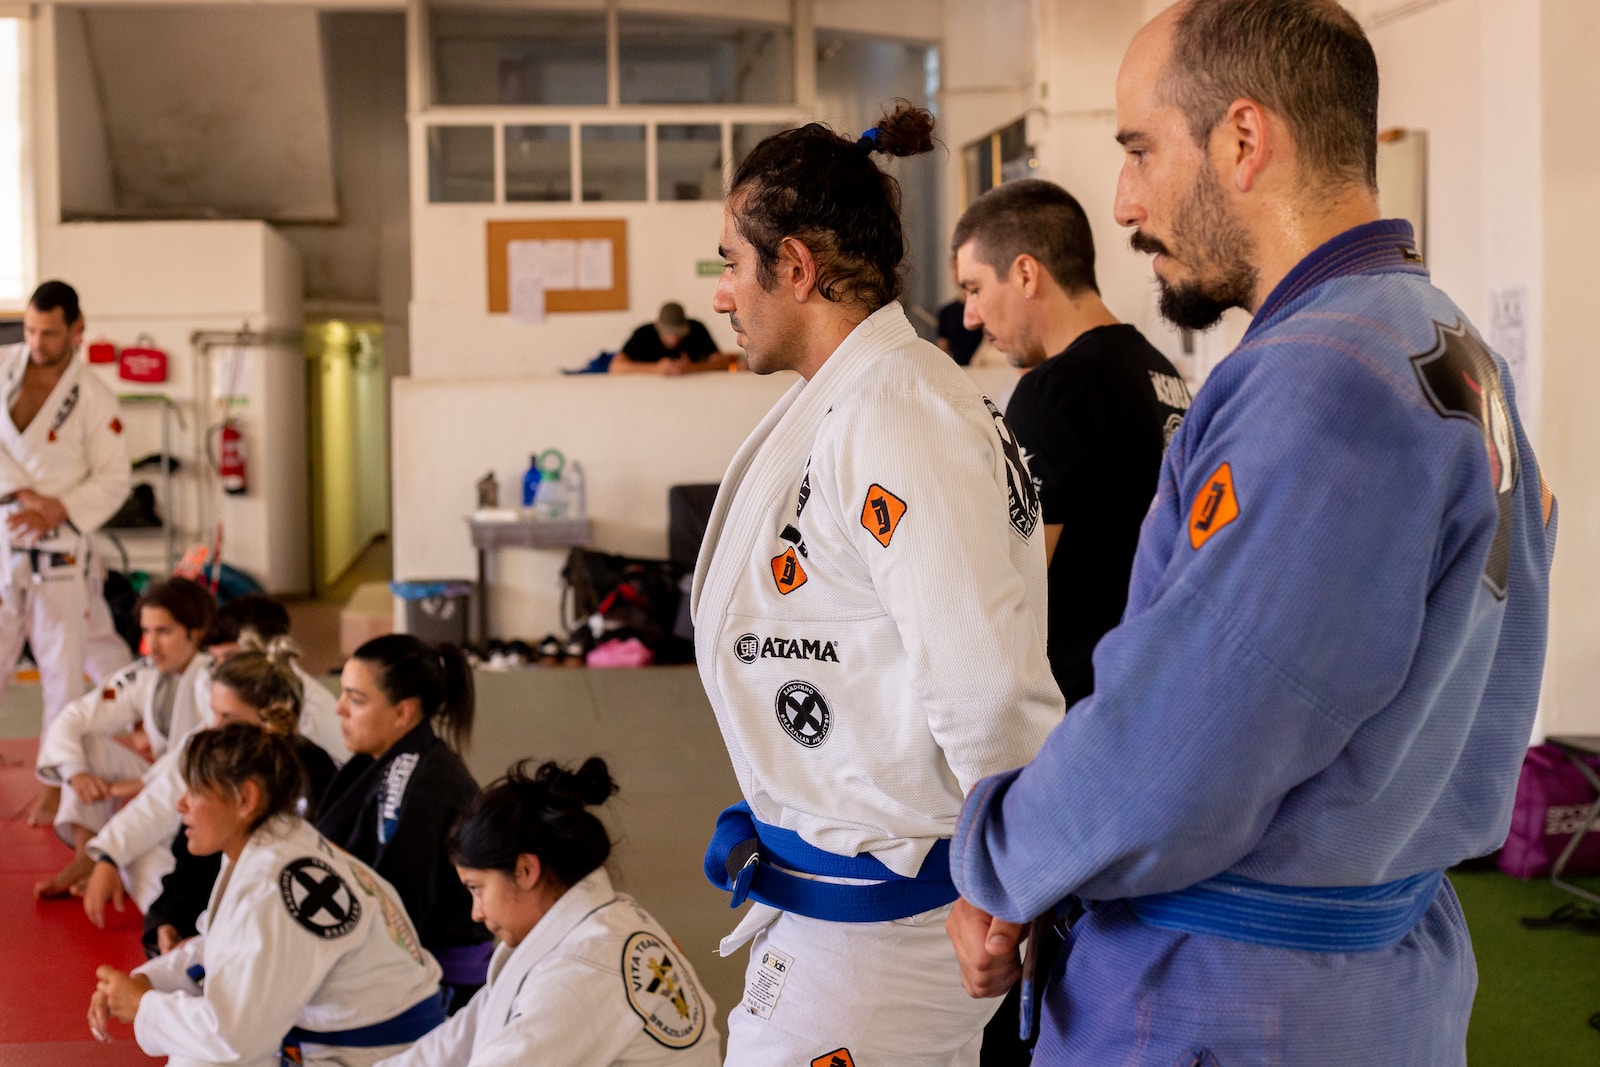 The First Timer’s Guide to Jiu-Jitsu: What to Expect in Your First Class